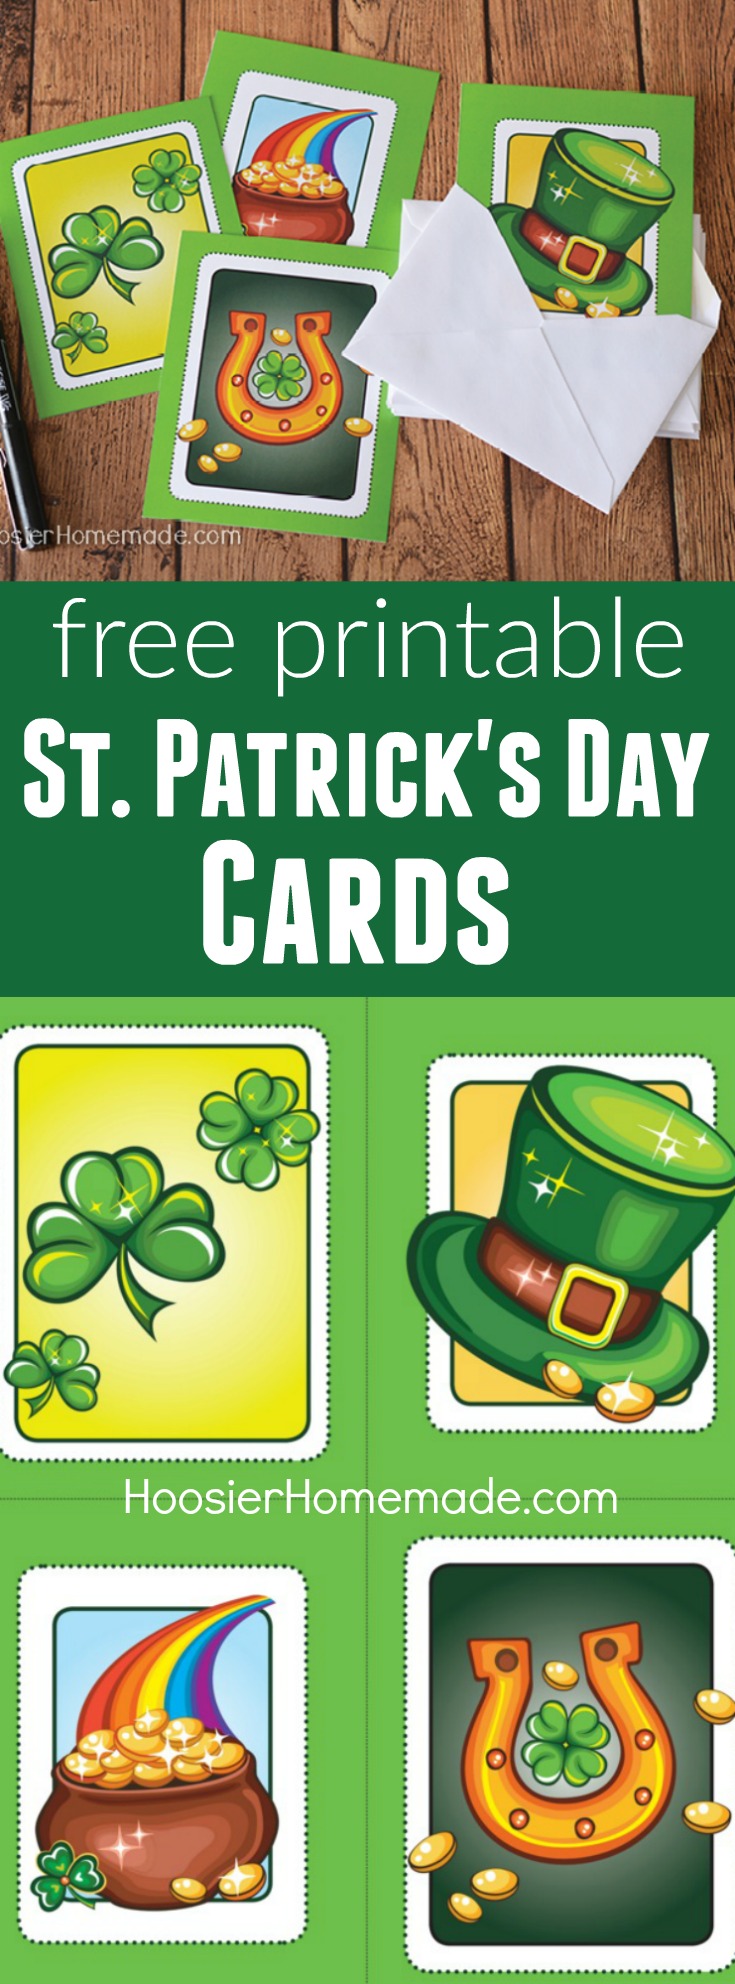 Let's Get Fit Shaced Easy DIY Digital Download and Print Card and Envelope for Friends and Family Printable Funny Saint Patrick's Day Card